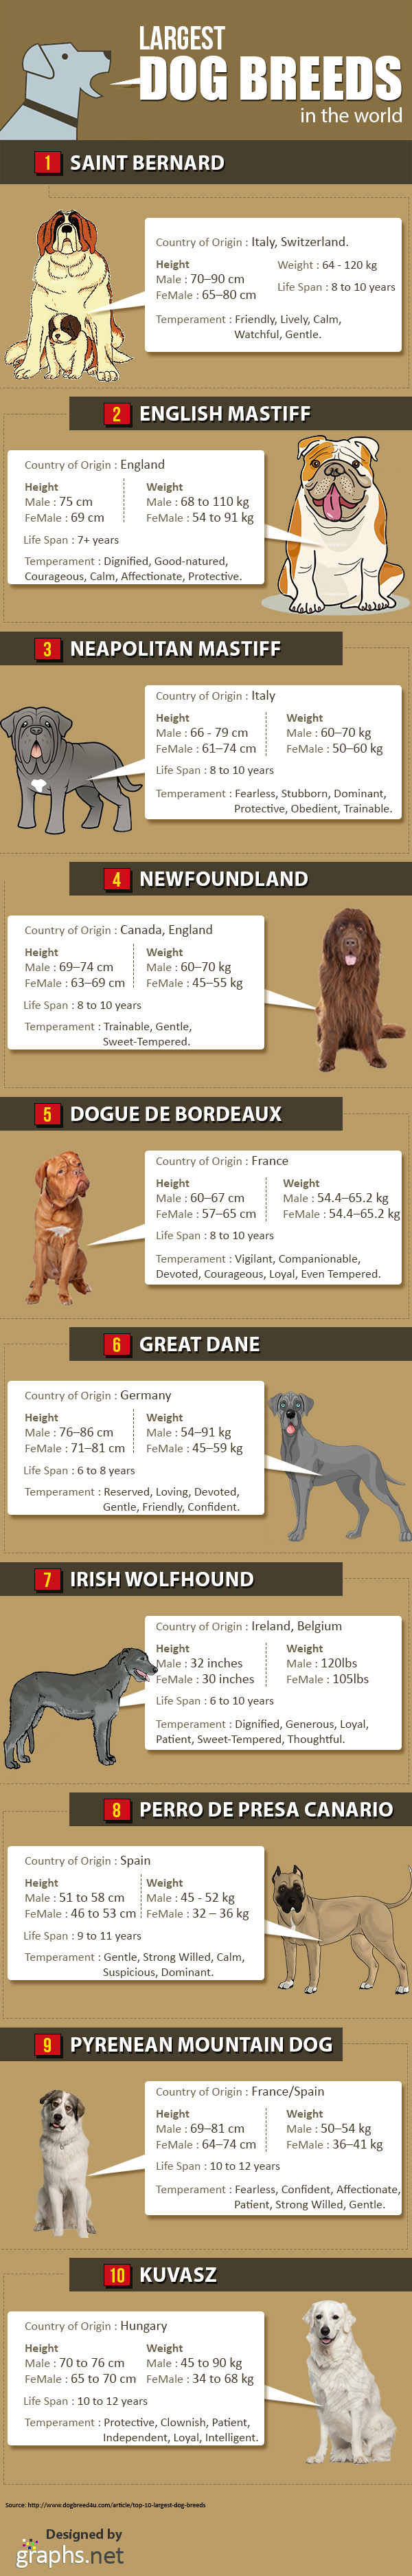 Largest Dog Breeds in the World